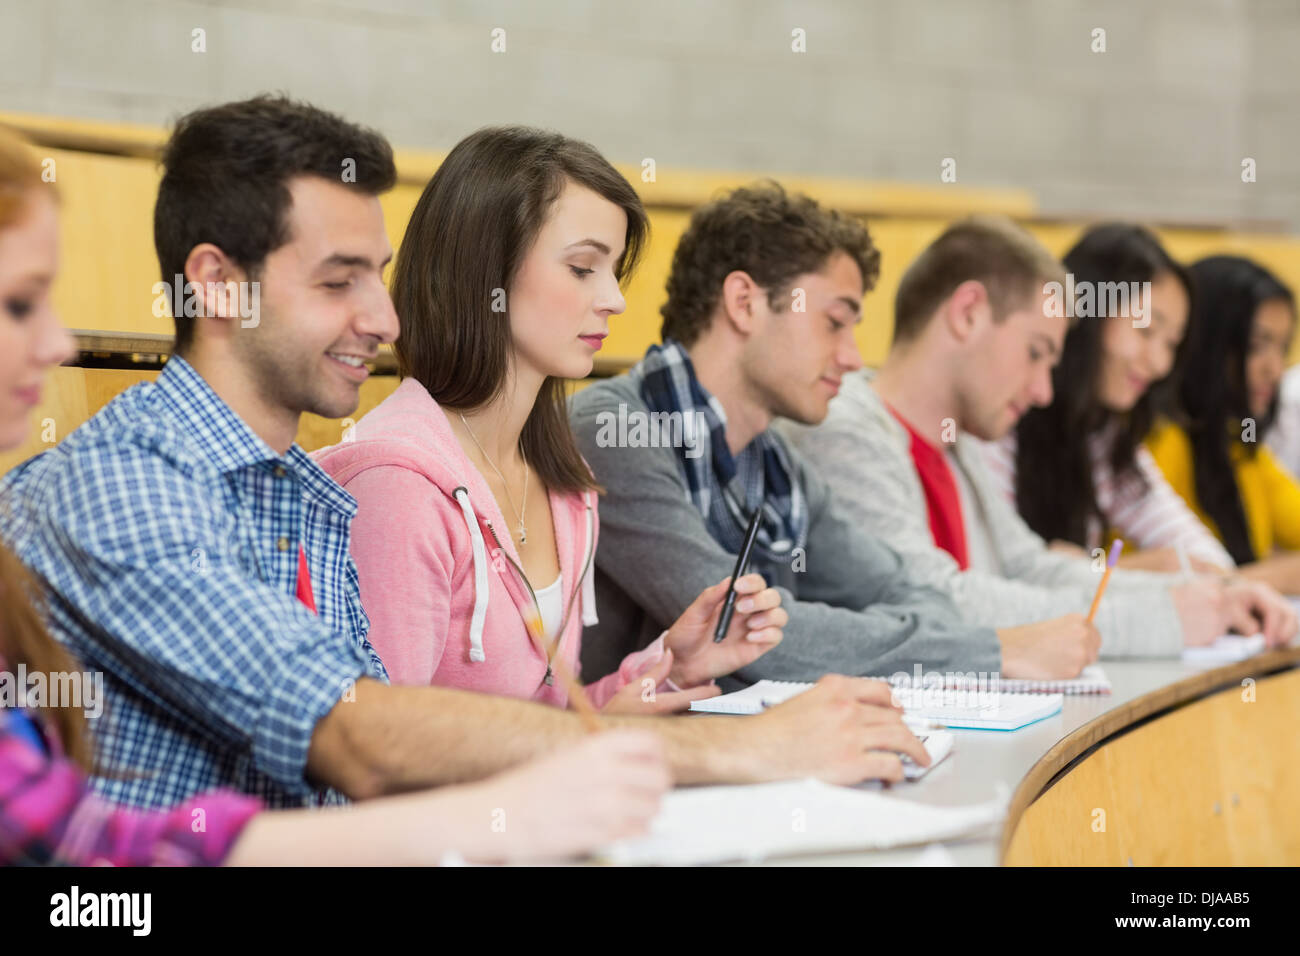 Students writing notes in a row at the lecture hall Stock Photo